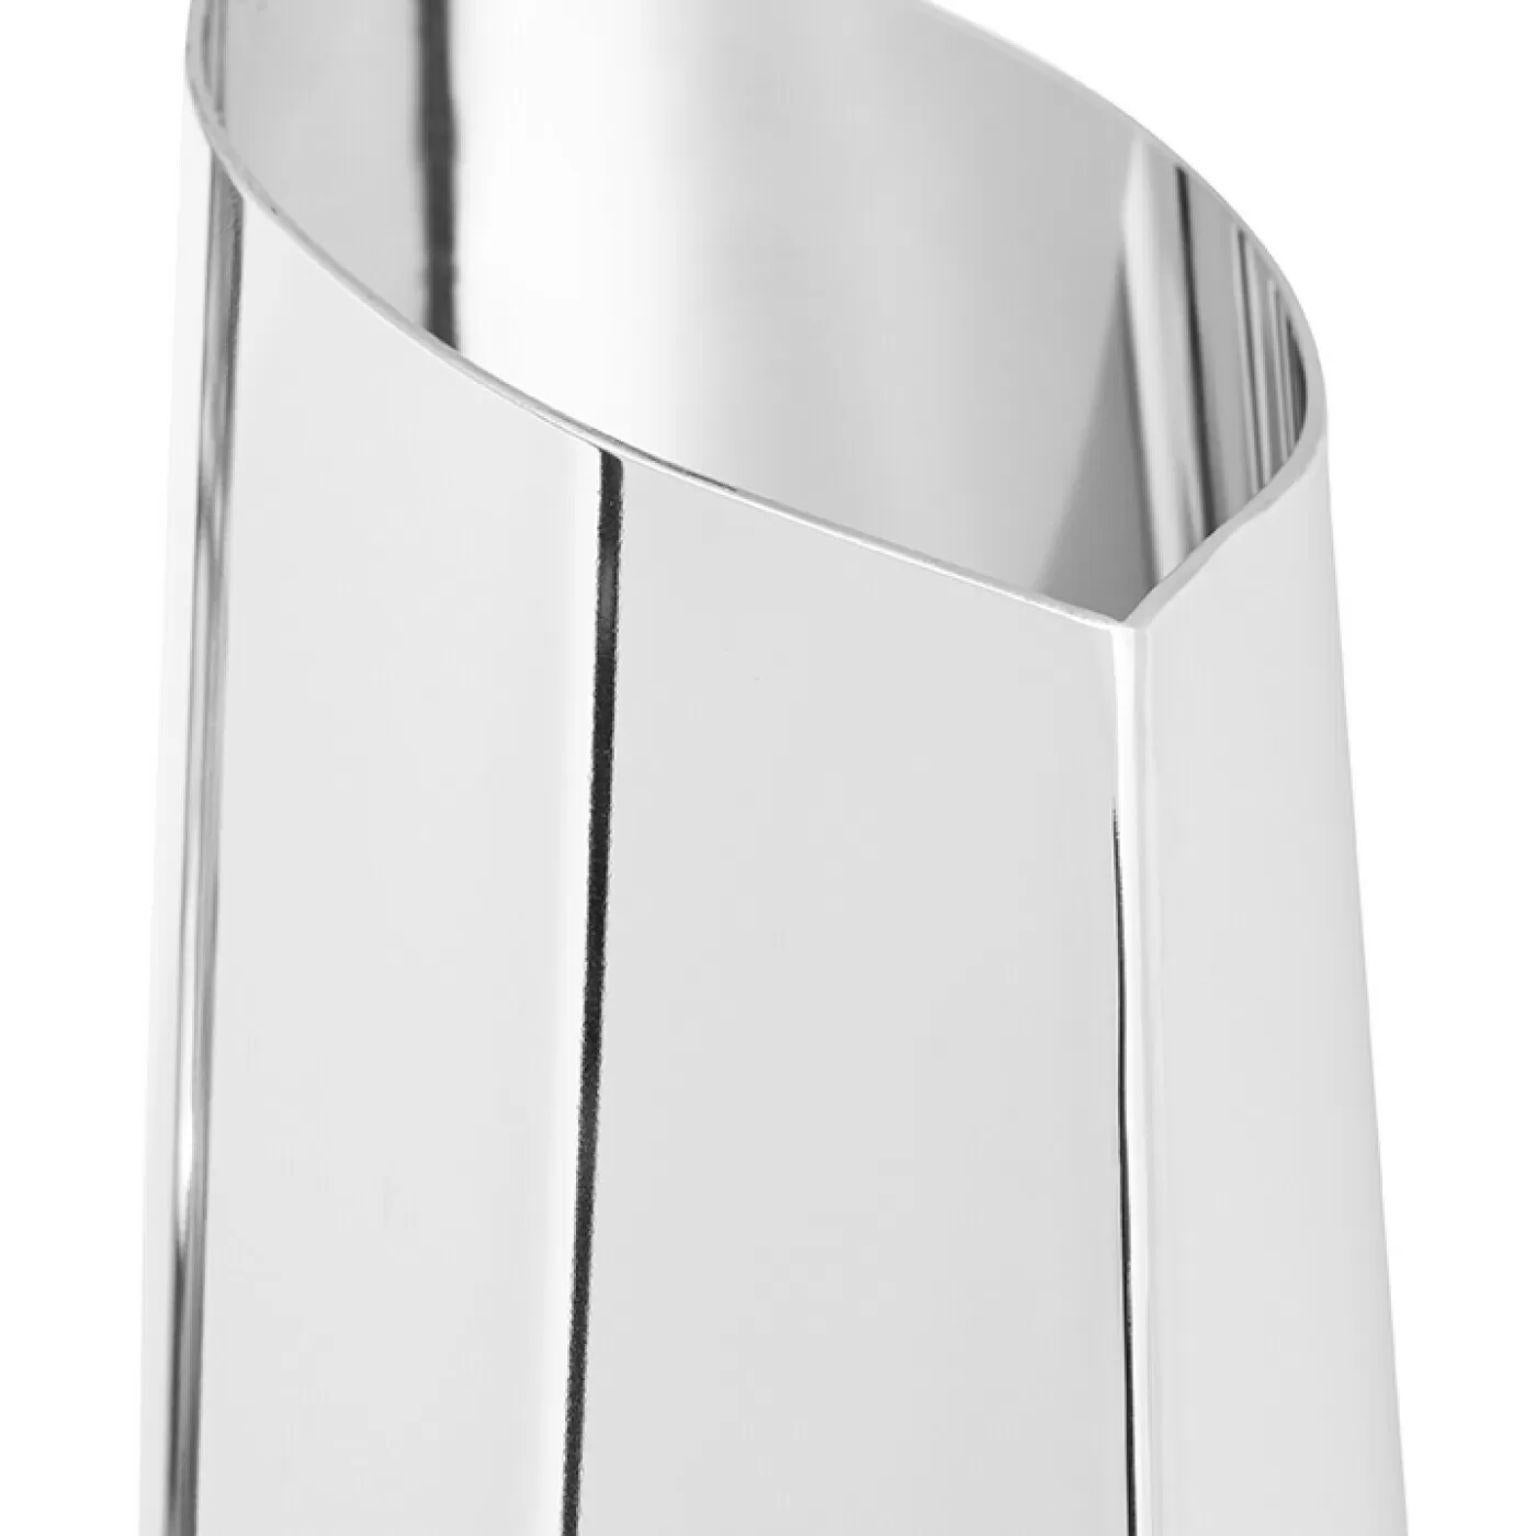 Stainless Steel Parova Flamed Gold L85 Vase by Zieta For Sale